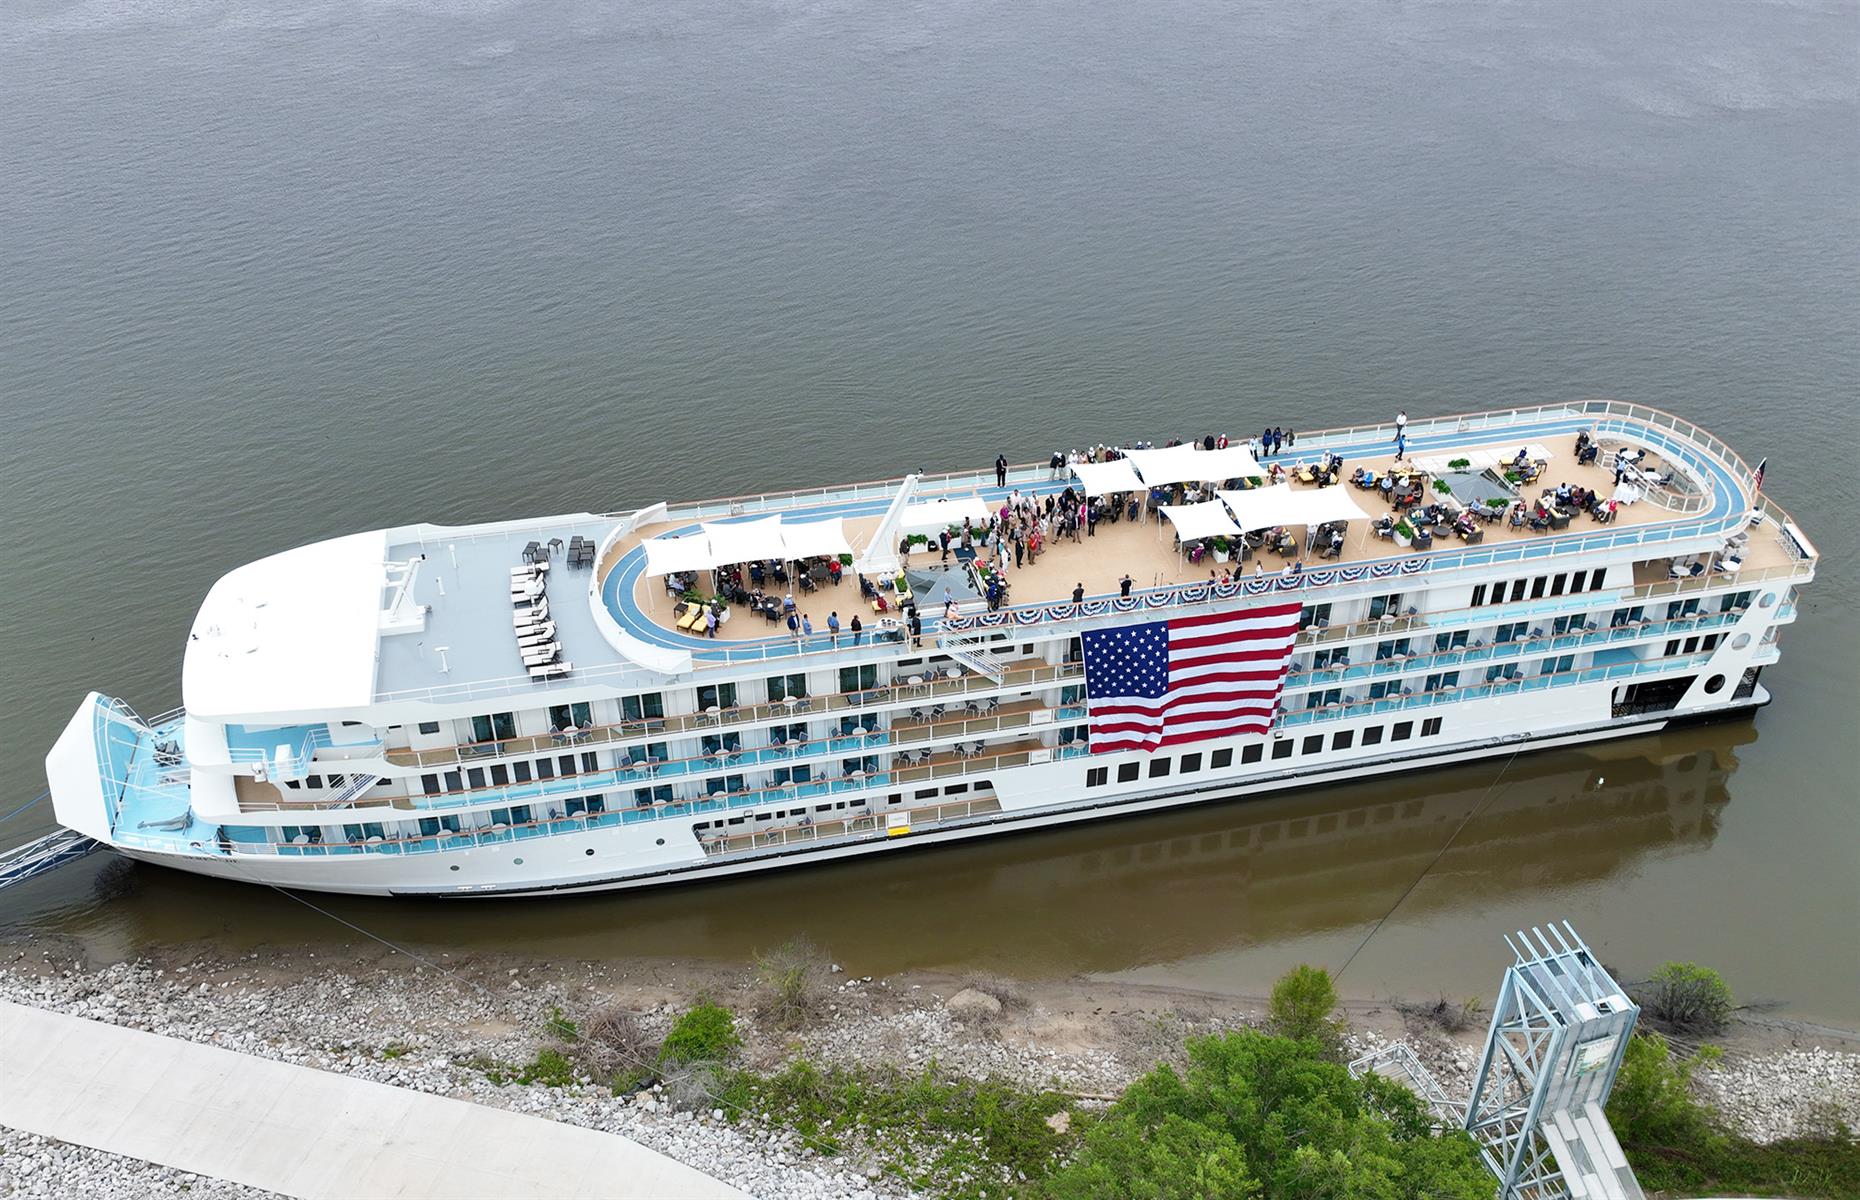 <p>There are some great day trips that give you a hint of life along the Mississippi, but for a deep dive into all things America, a longer sailing will let you sit back and soak up the scenery. American Cruise Lines has a whopping 16-day Great Heartland Cruise that is a roll call of American greatness, starting from £8,268 ($10,490) per person. Start in St Paul, Minnesota, before heading to New Orleans via Tunica, Vicksburg and Natchez, all aboard a traditional paddlewheel riverboat with space for just 150 guests. Huckleberry Finn, eat your heart out. </p>